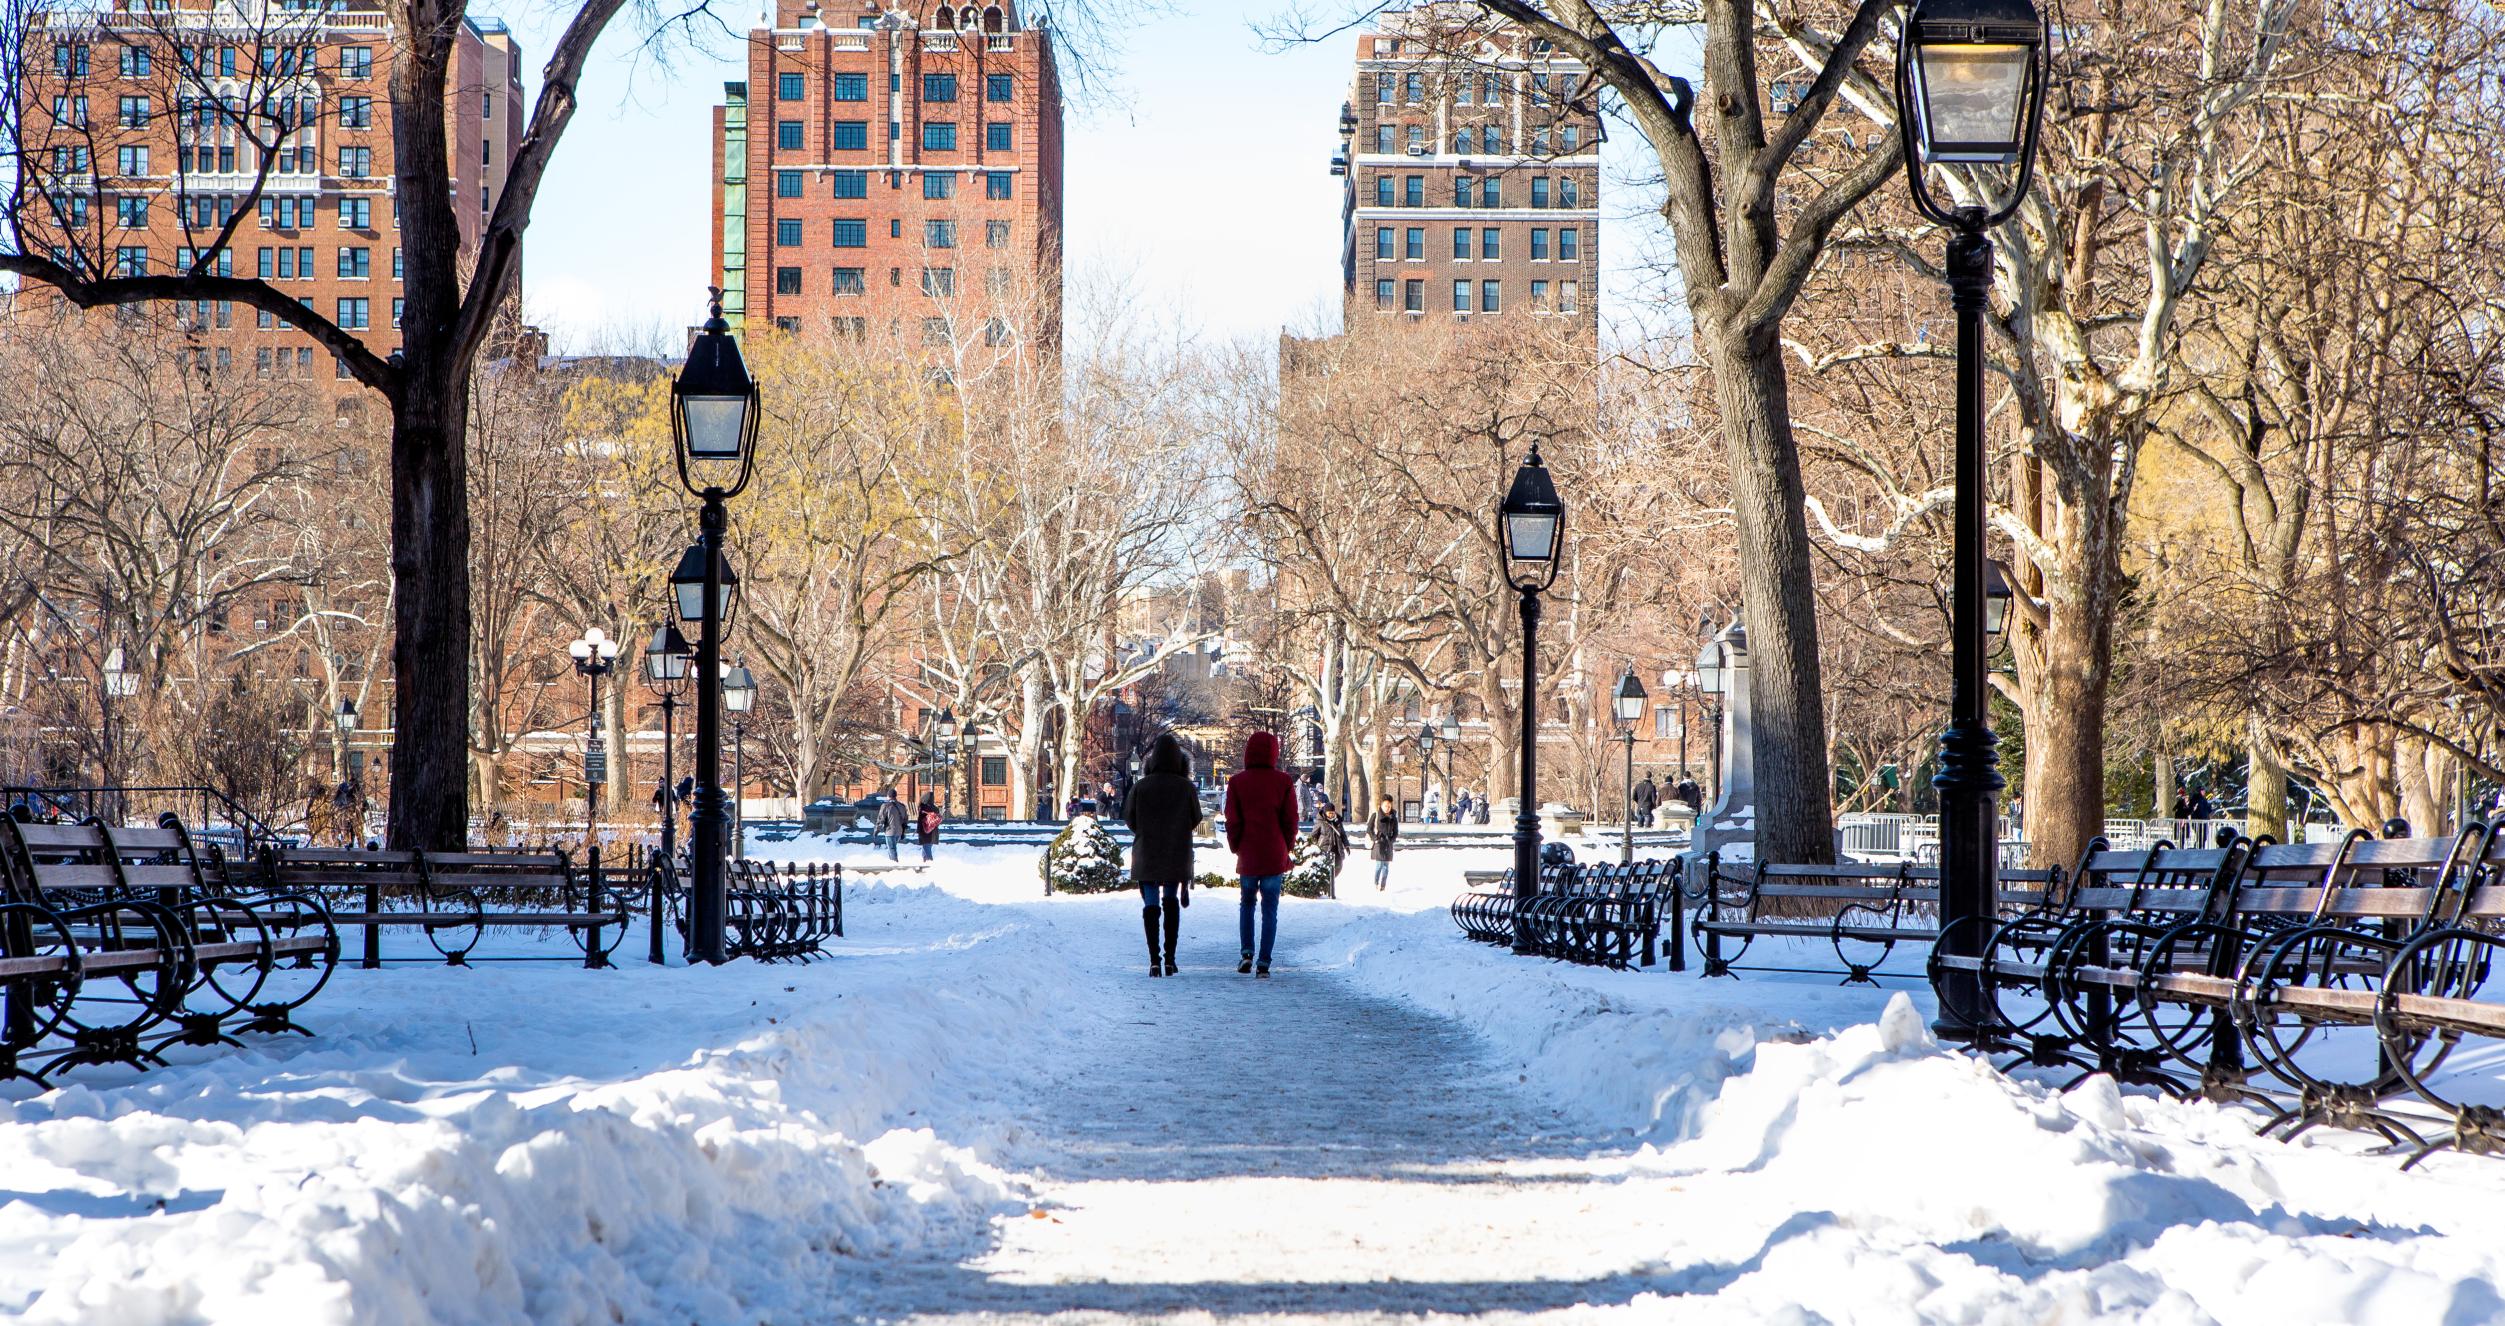 Two students walk down a snowy scene in Washington Square Park